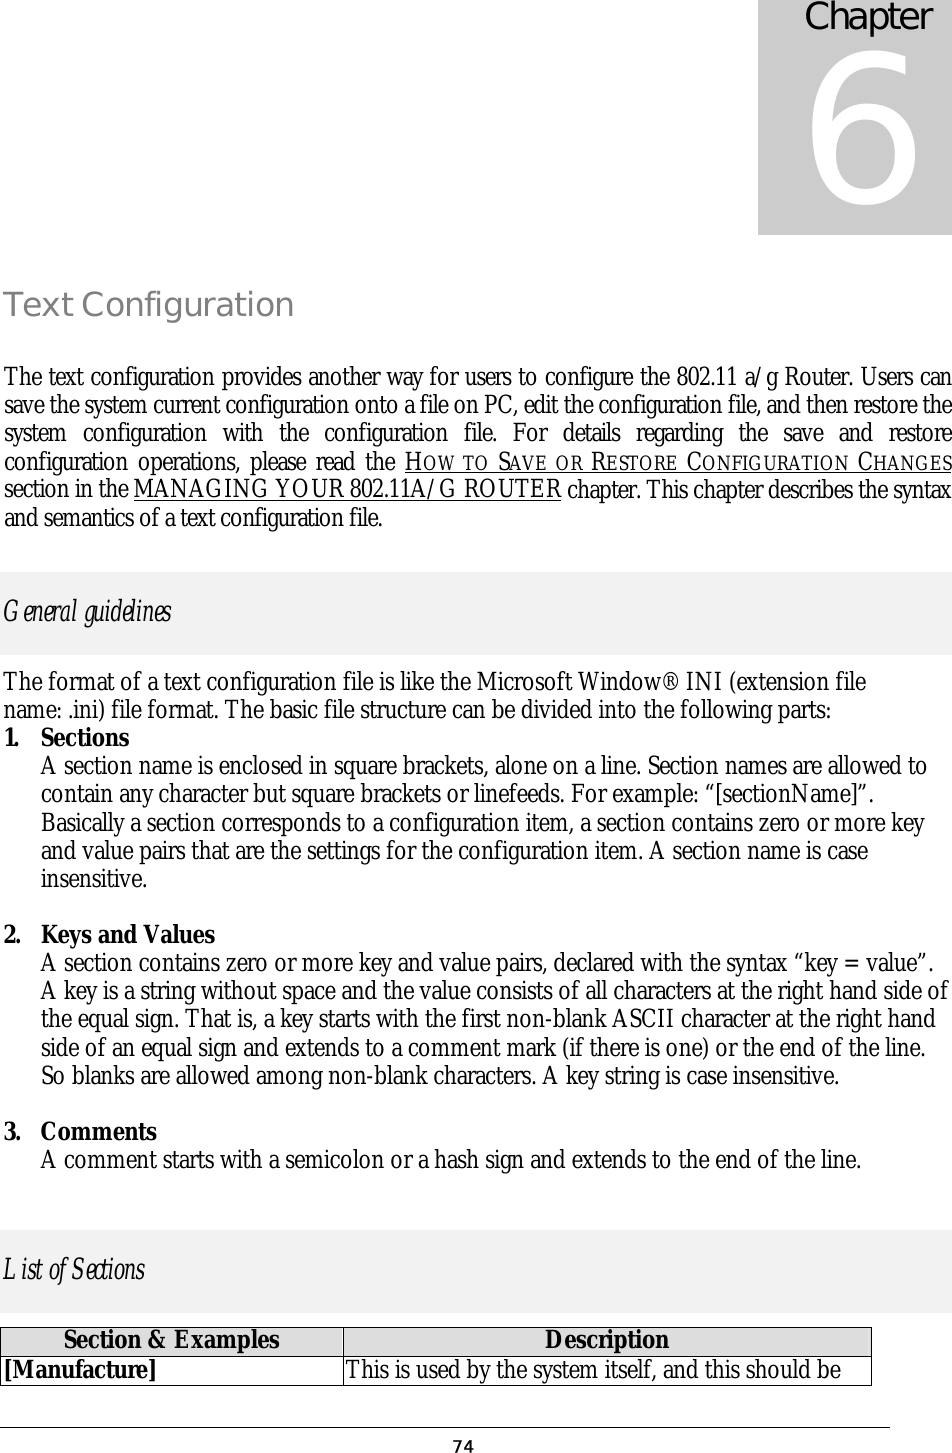 Text Configuration The text configuration provides another way for users to configure the 802.11 a/g Router. Users can save the system current configuration onto a file on PC, edit the configuration file, and then restore the system configuration with the configuration file. For details regarding the save and restore configuration operations, please read the HOW TO SAVE OR RESTORE CONFIGURATION CHANGES section in the MANAGING YOUR 802.11A/G ROUTER chapter. This chapter describes the syntax and semantics of a text configuration file. General guidelines The format of a text configuration file is like the Microsoft Window® INI (extension file name: .ini) file format. The basic file structure can be divided into the following parts: 1. Sections A section name is enclosed in square brackets, alone on a line. Section names are allowed to contain any character but square brackets or linefeeds. For example: “[sectionName]”. Basically a section corresponds to a configuration item, a section contains zero or more key and value pairs that are the settings for the configuration item. A section name is case insensitive.  2.  Keys and Values A section contains zero or more key and value pairs, declared with the syntax “key = value”. A key is a string without space and the value consists of all characters at the right hand side of the equal sign. That is, a key starts with the first non-blank ASCII character at the right hand side of an equal sign and extends to a comment mark (if there is one) or the end of the line. So blanks are allowed among non-blank characters. A key string is case insensitive.  3. Comments A comment starts with a semicolon or a hash sign and extends to the end of the line.  List of Sections Section &amp; Examples  Description [Manufacture] This is used by the system itself, and this should be Chapter 6  74